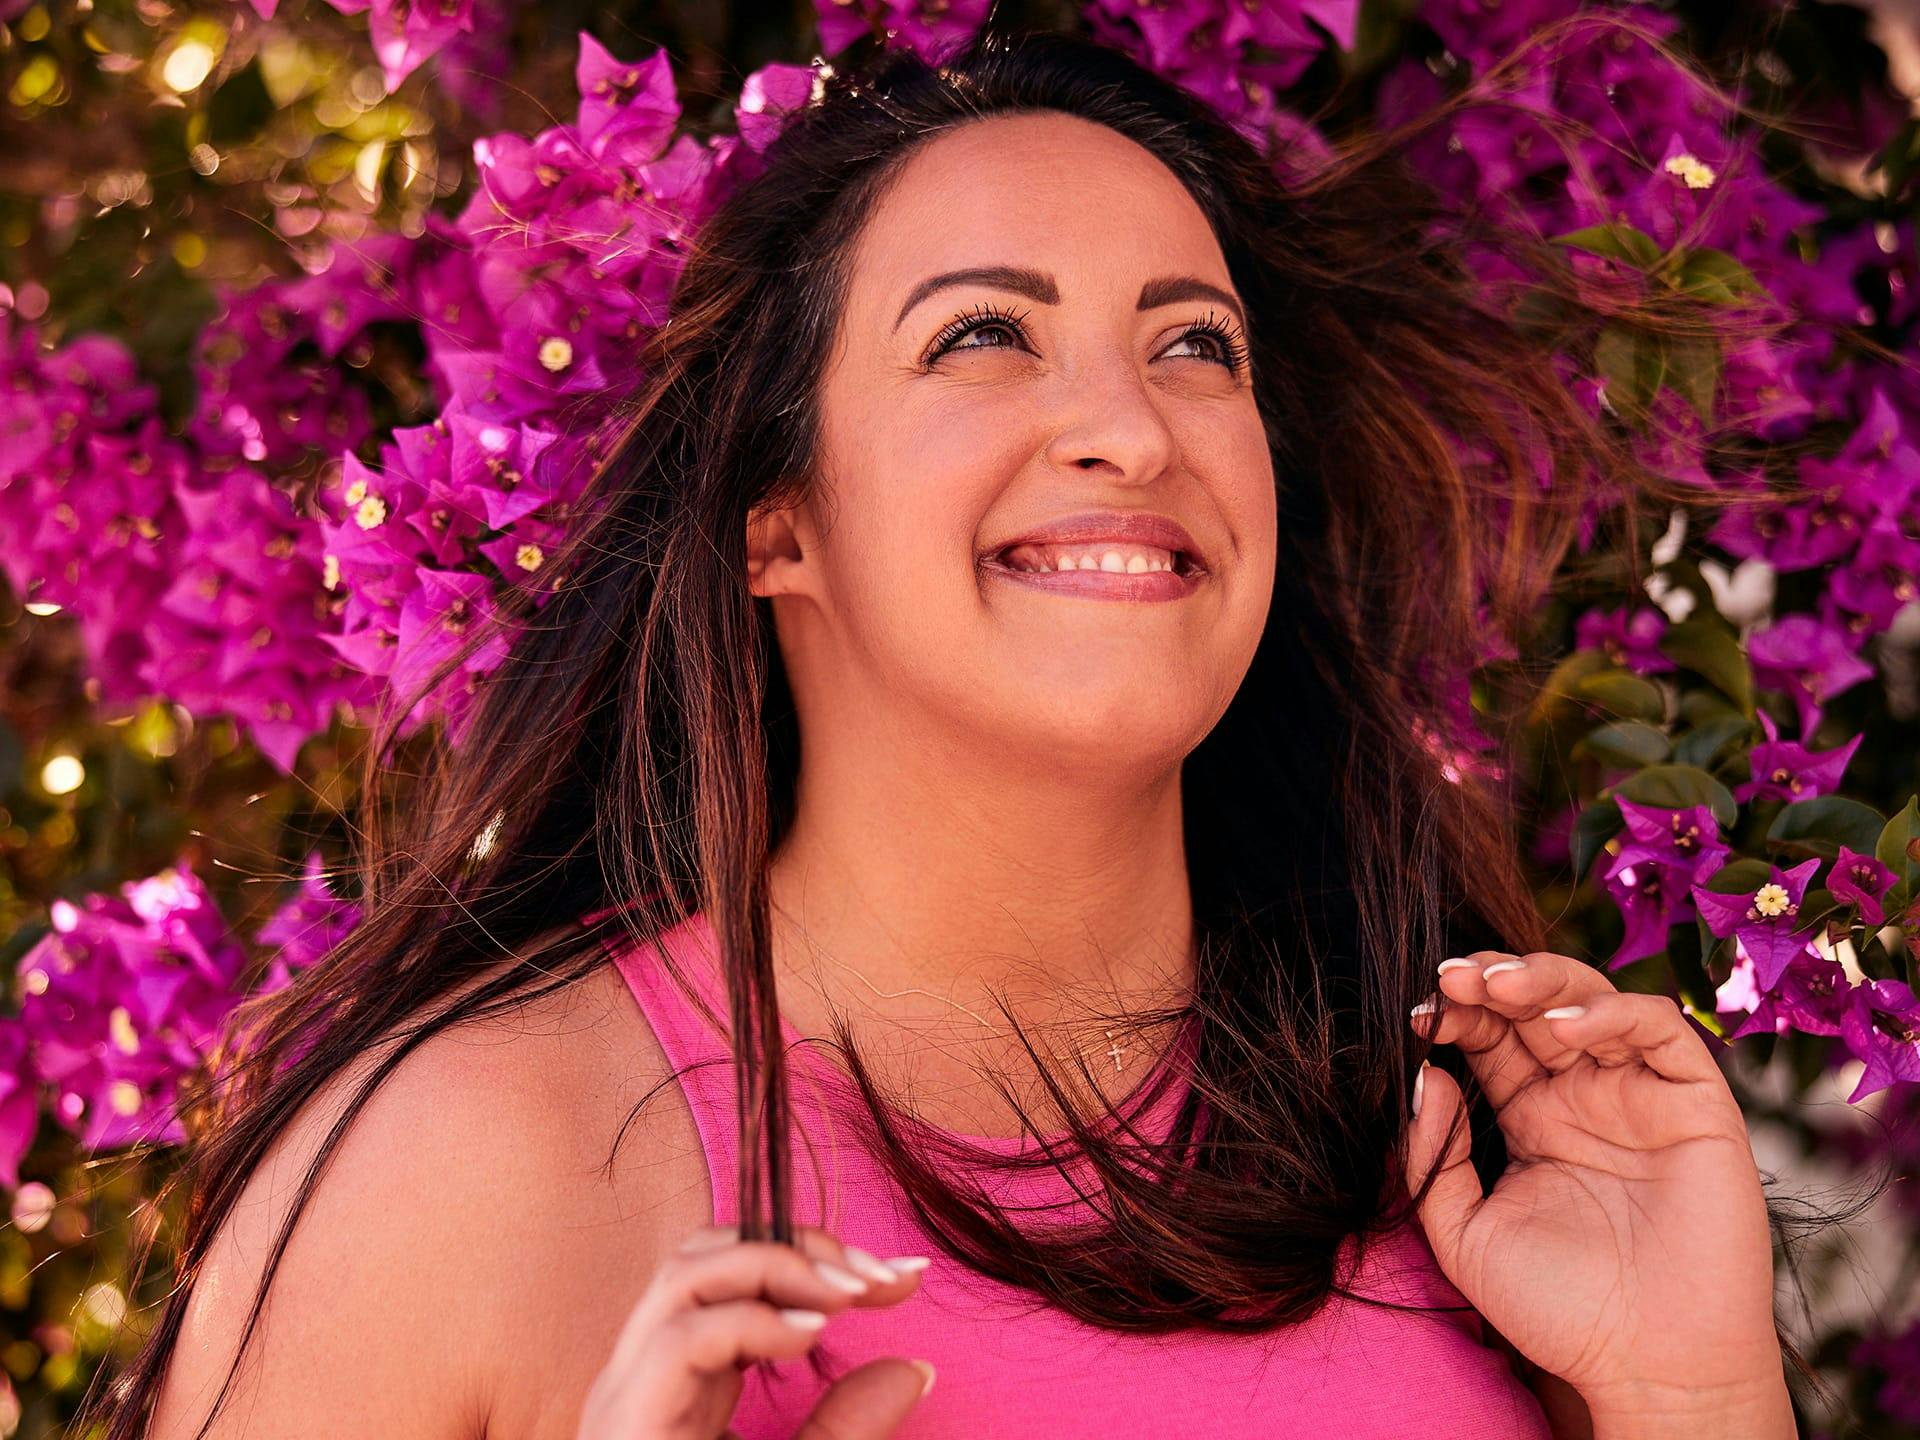 Woman smiling in front of pink flowers